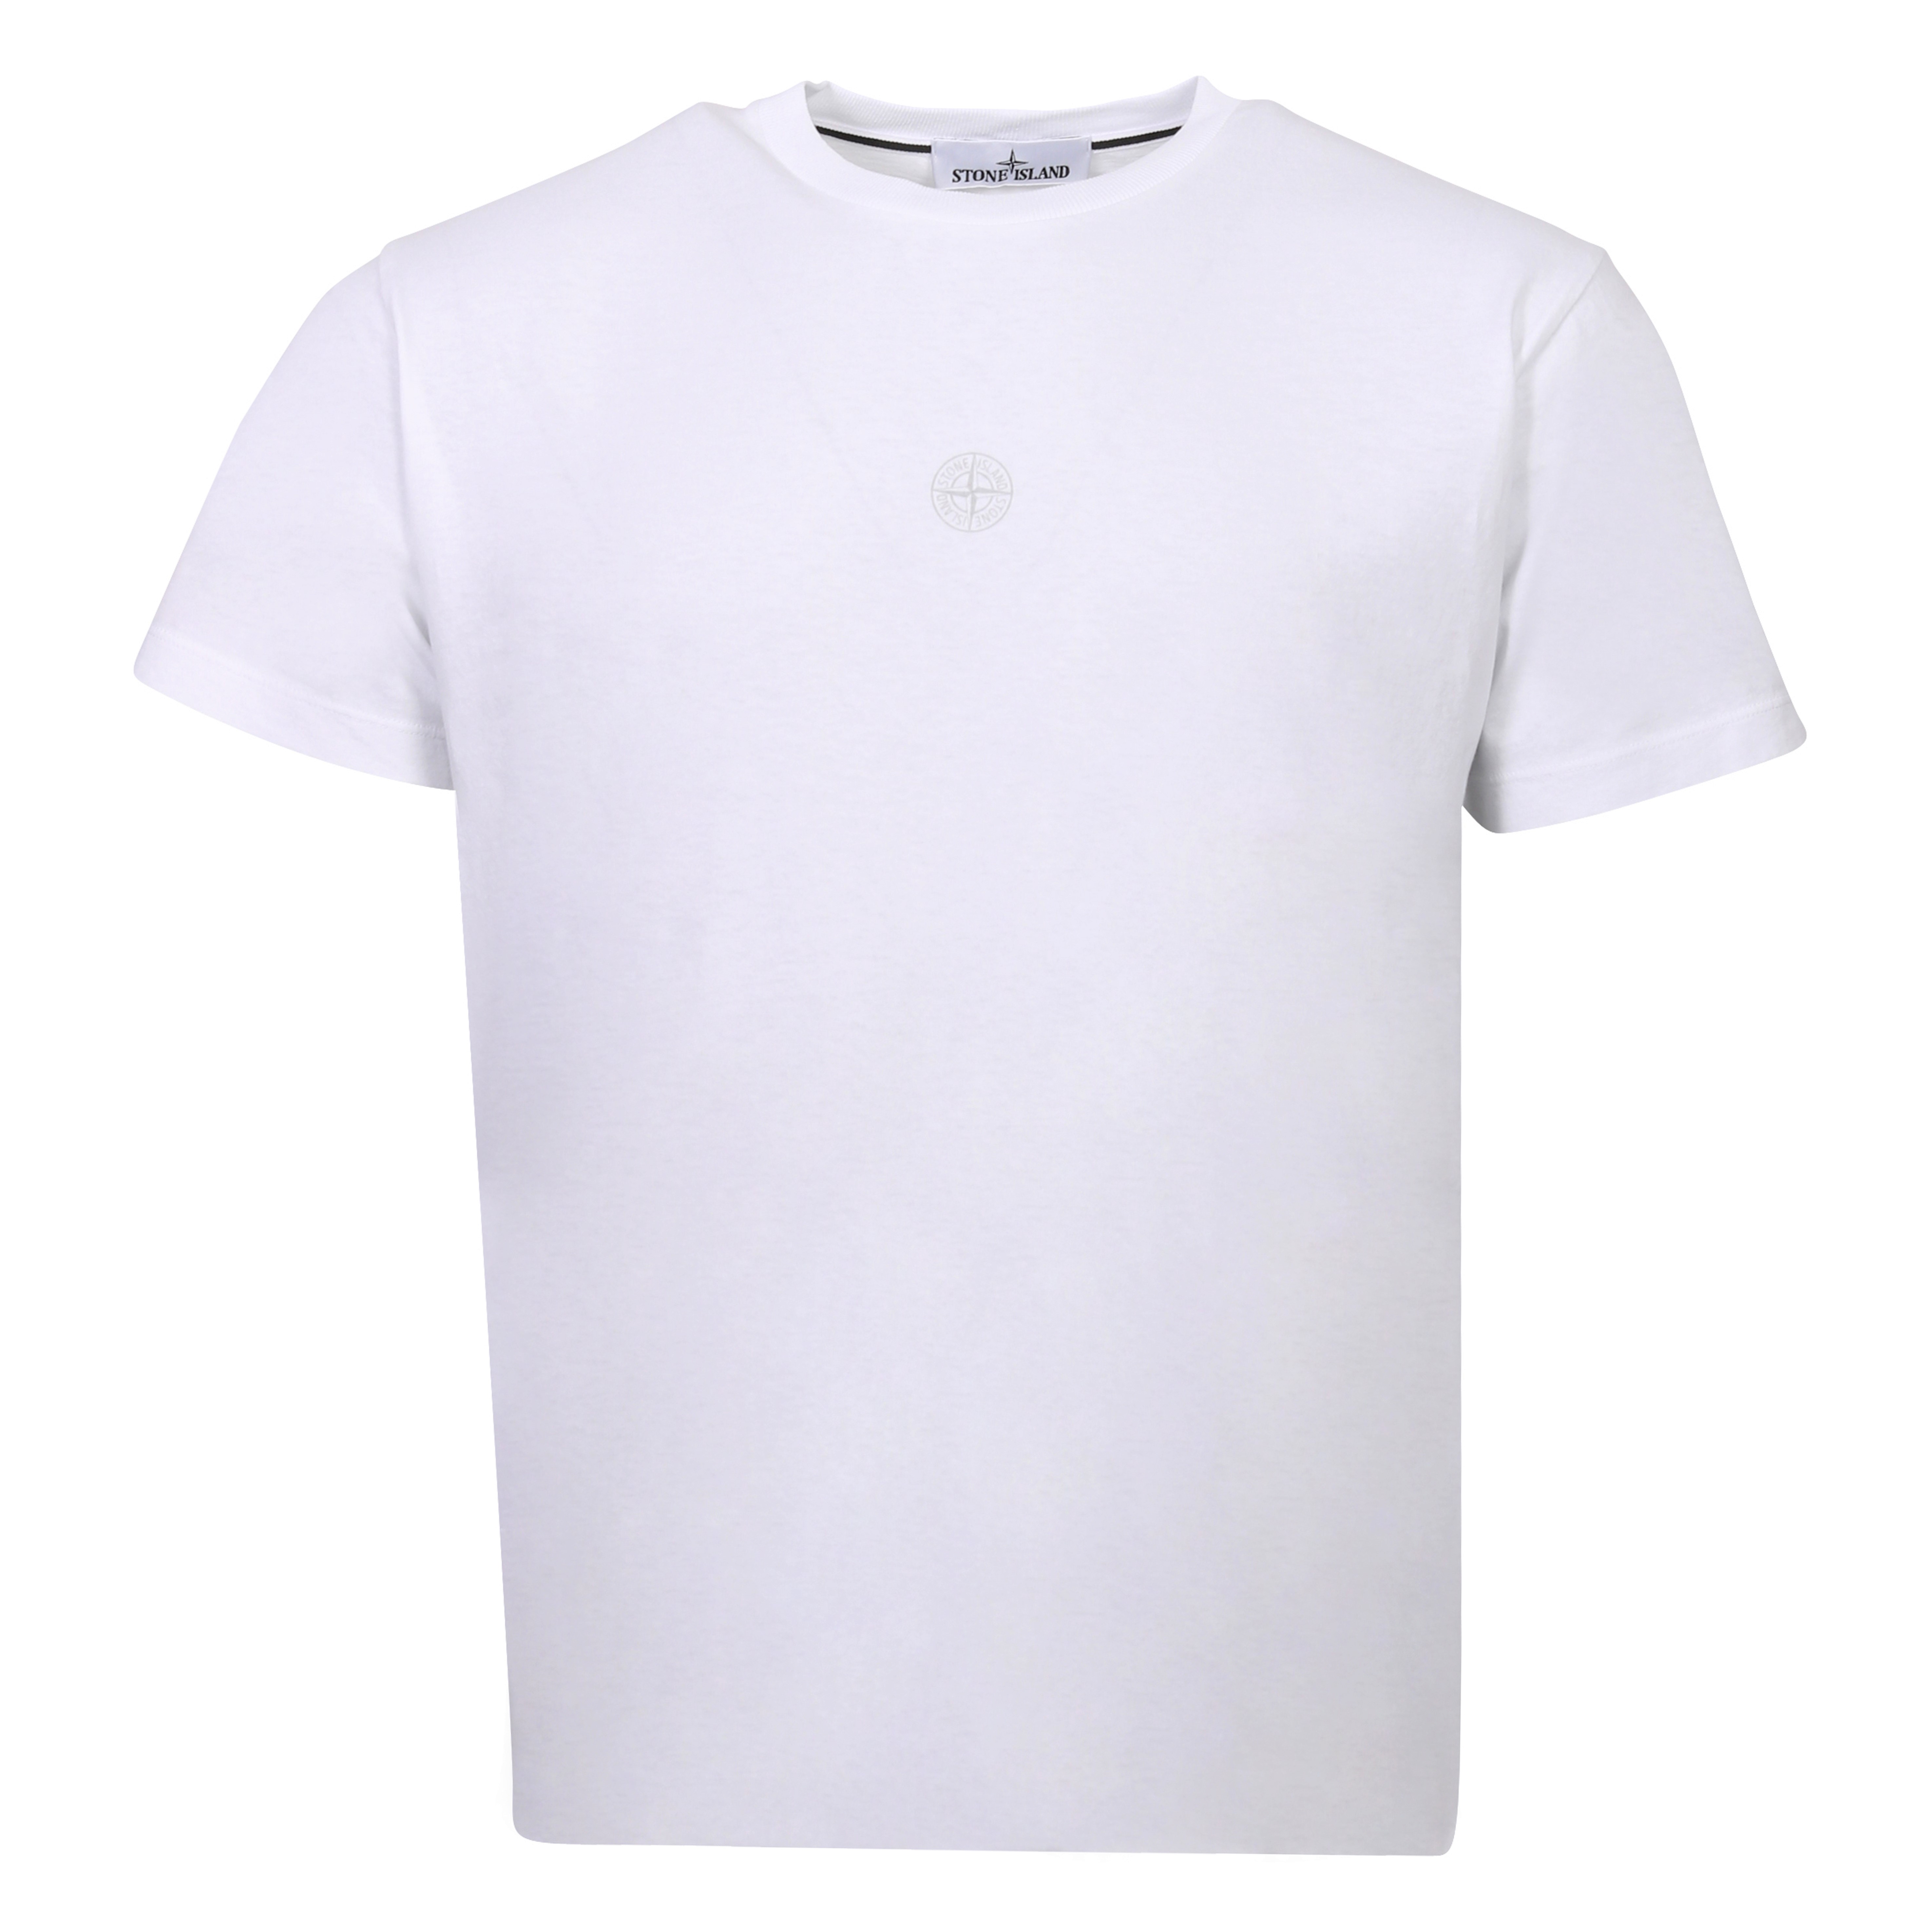 Stone Island Backprinted T-Shirt in White 3XL